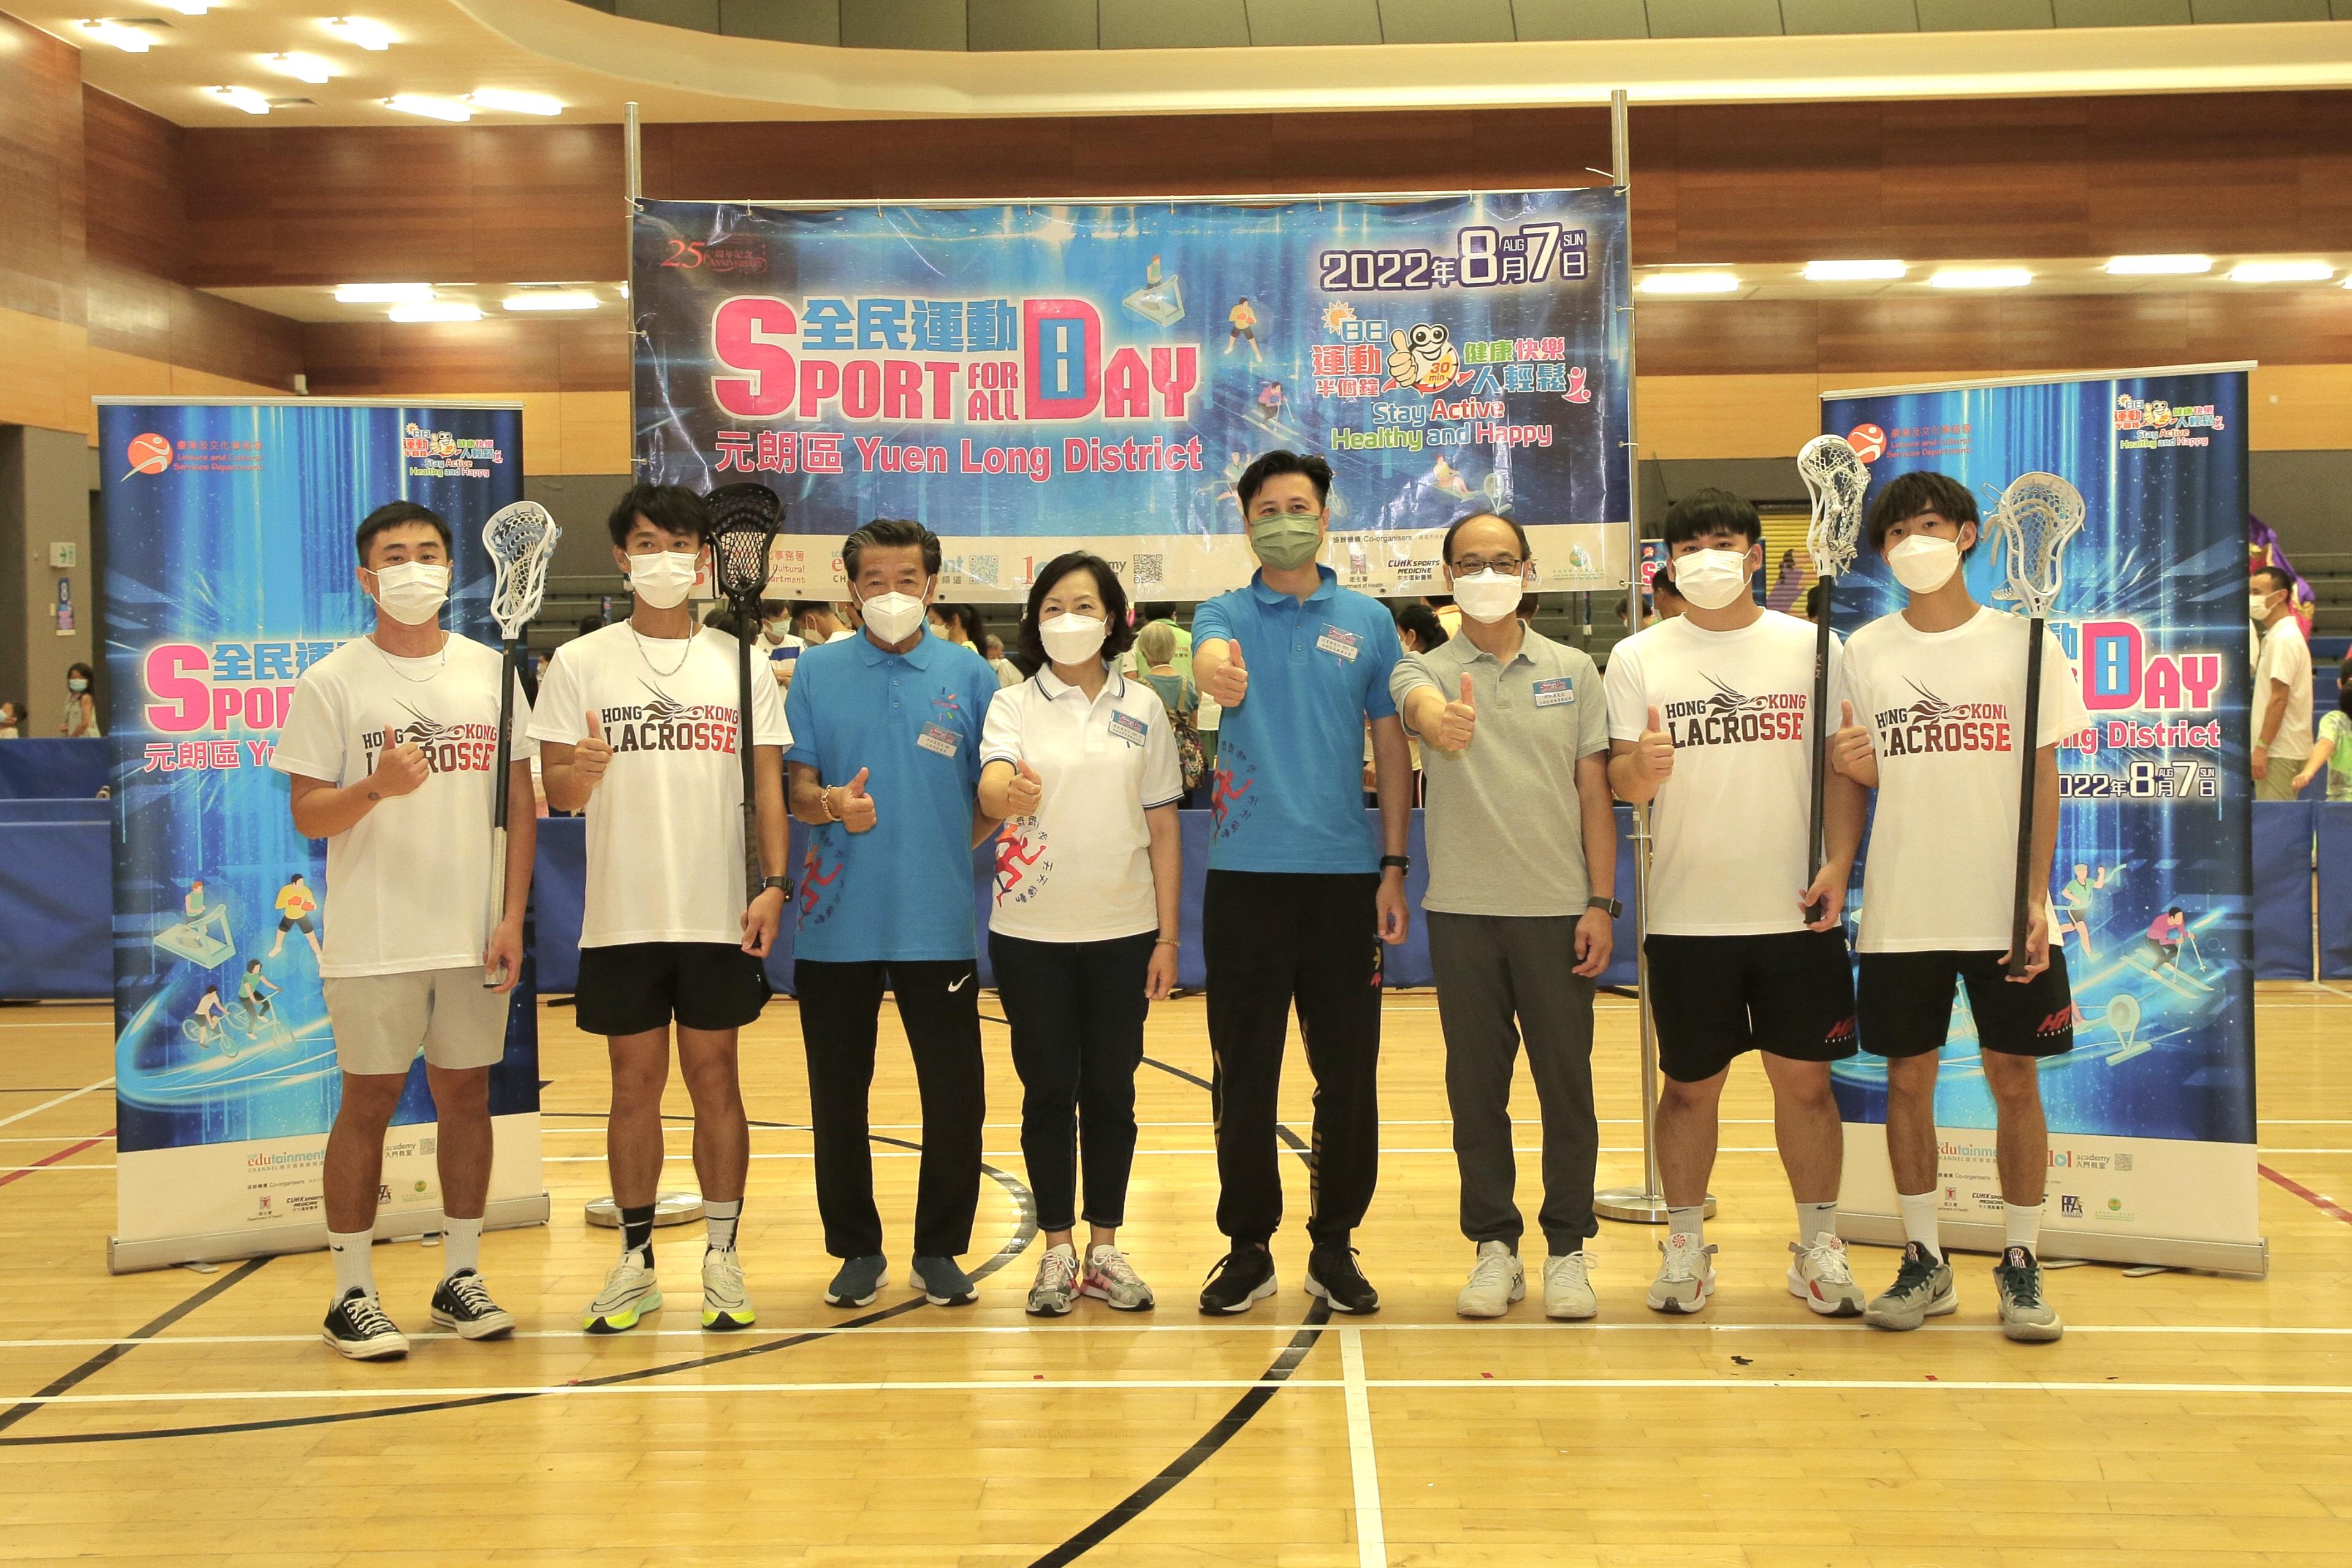 The Secretary for Home and Youth Affairs, Miss Alice Mak, today (August 7) participated in Sport For All Day 2022 activities at the Tin Fai Road Sports Centre in Yuen Long District to bring the message of stay active, healthy and happy to the public. Photo shows Miss Mak (fourth left); the Chairman of Yuen Long District Council, Mr Shum Ho-kit (fourth right); and other guests at the event.

